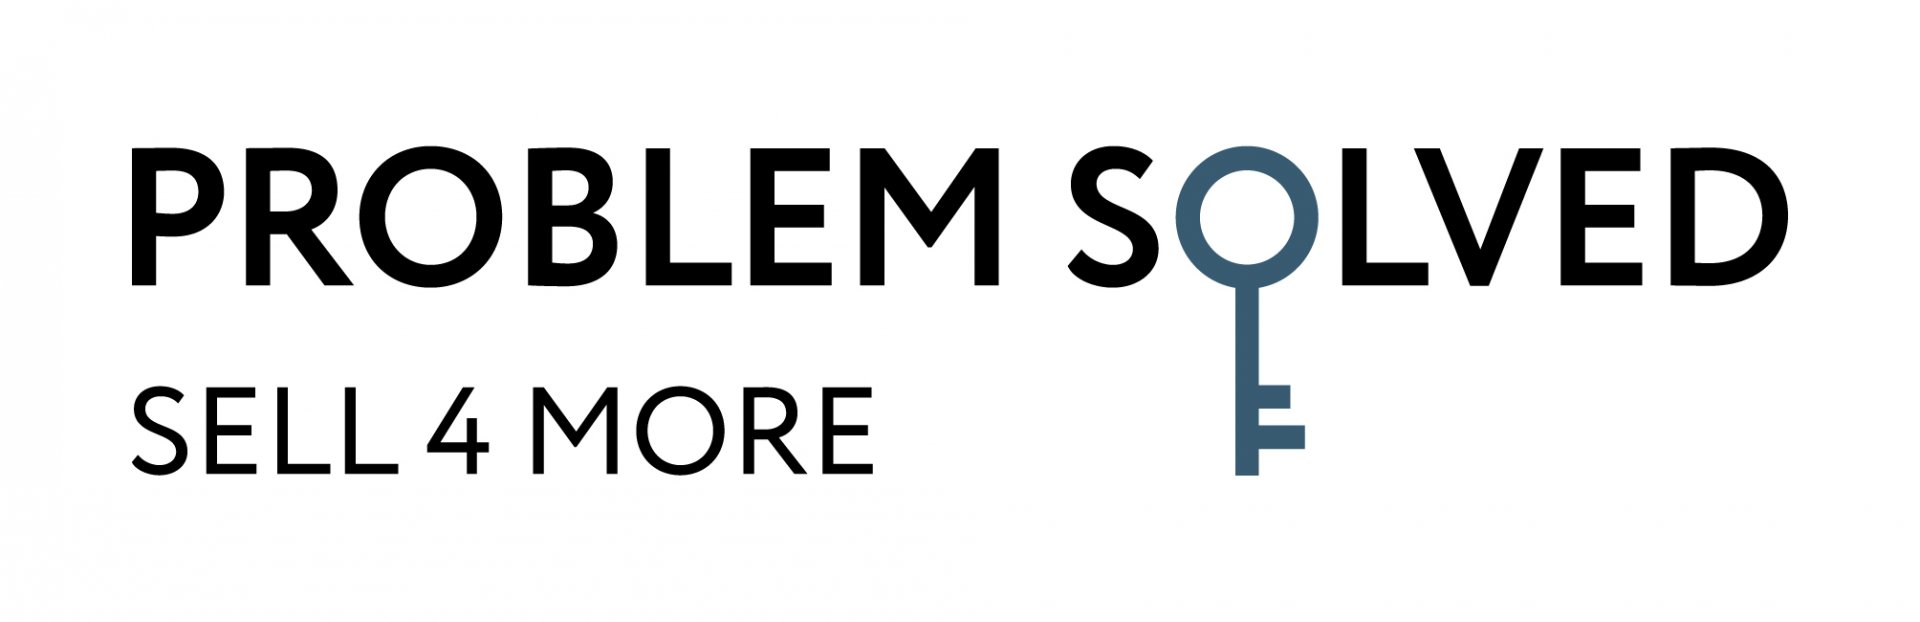 Problem Solved Sell 4 More logo